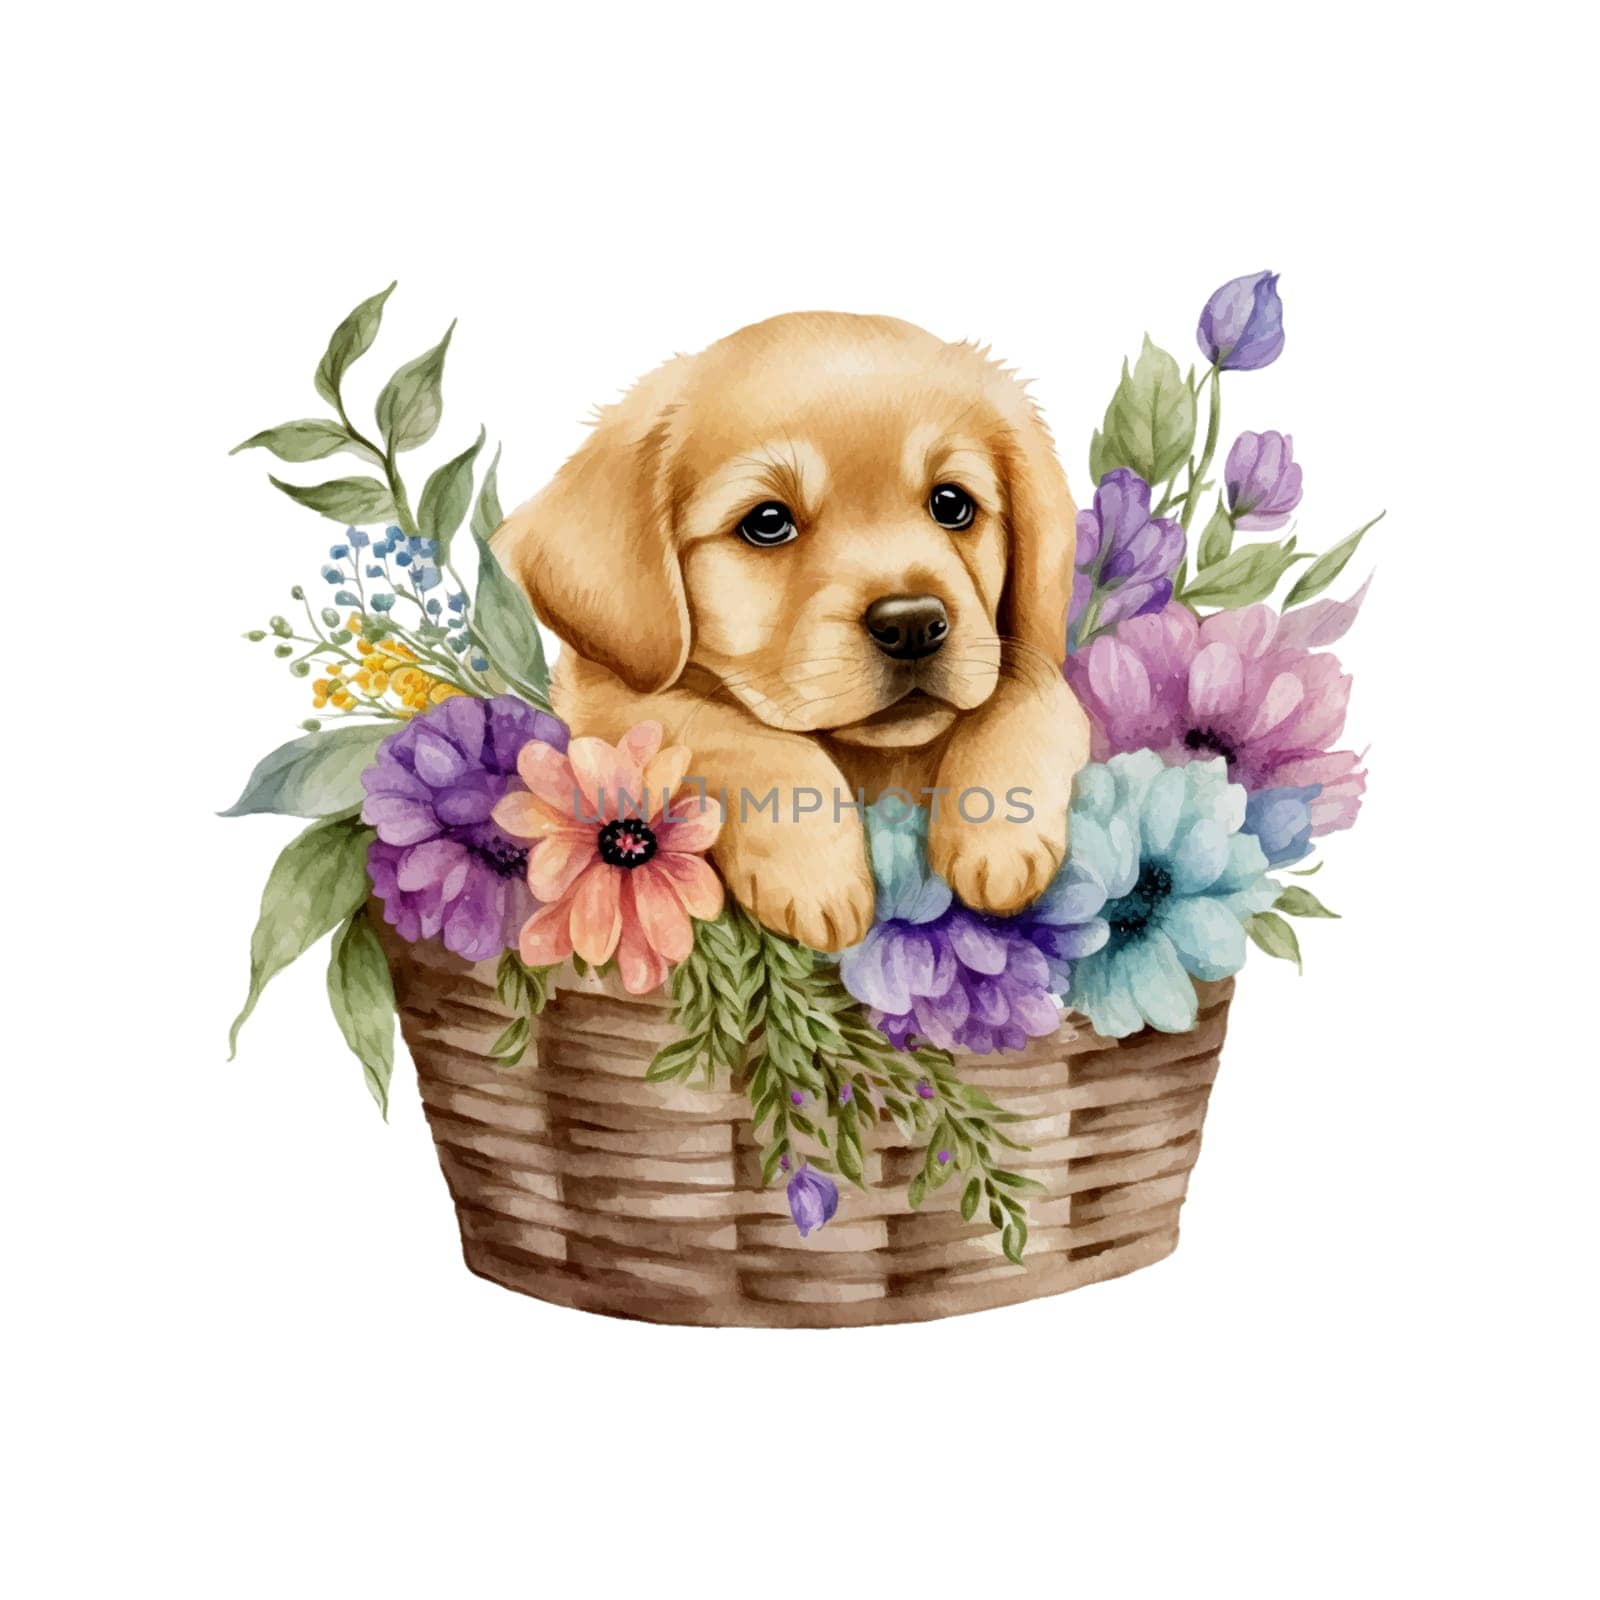 Baby Golden Retreiver Puppy in Flower Basket. Cute puppy in basket watercolor illustration for design element, invitation card, sublimation, painting, wall art and more.